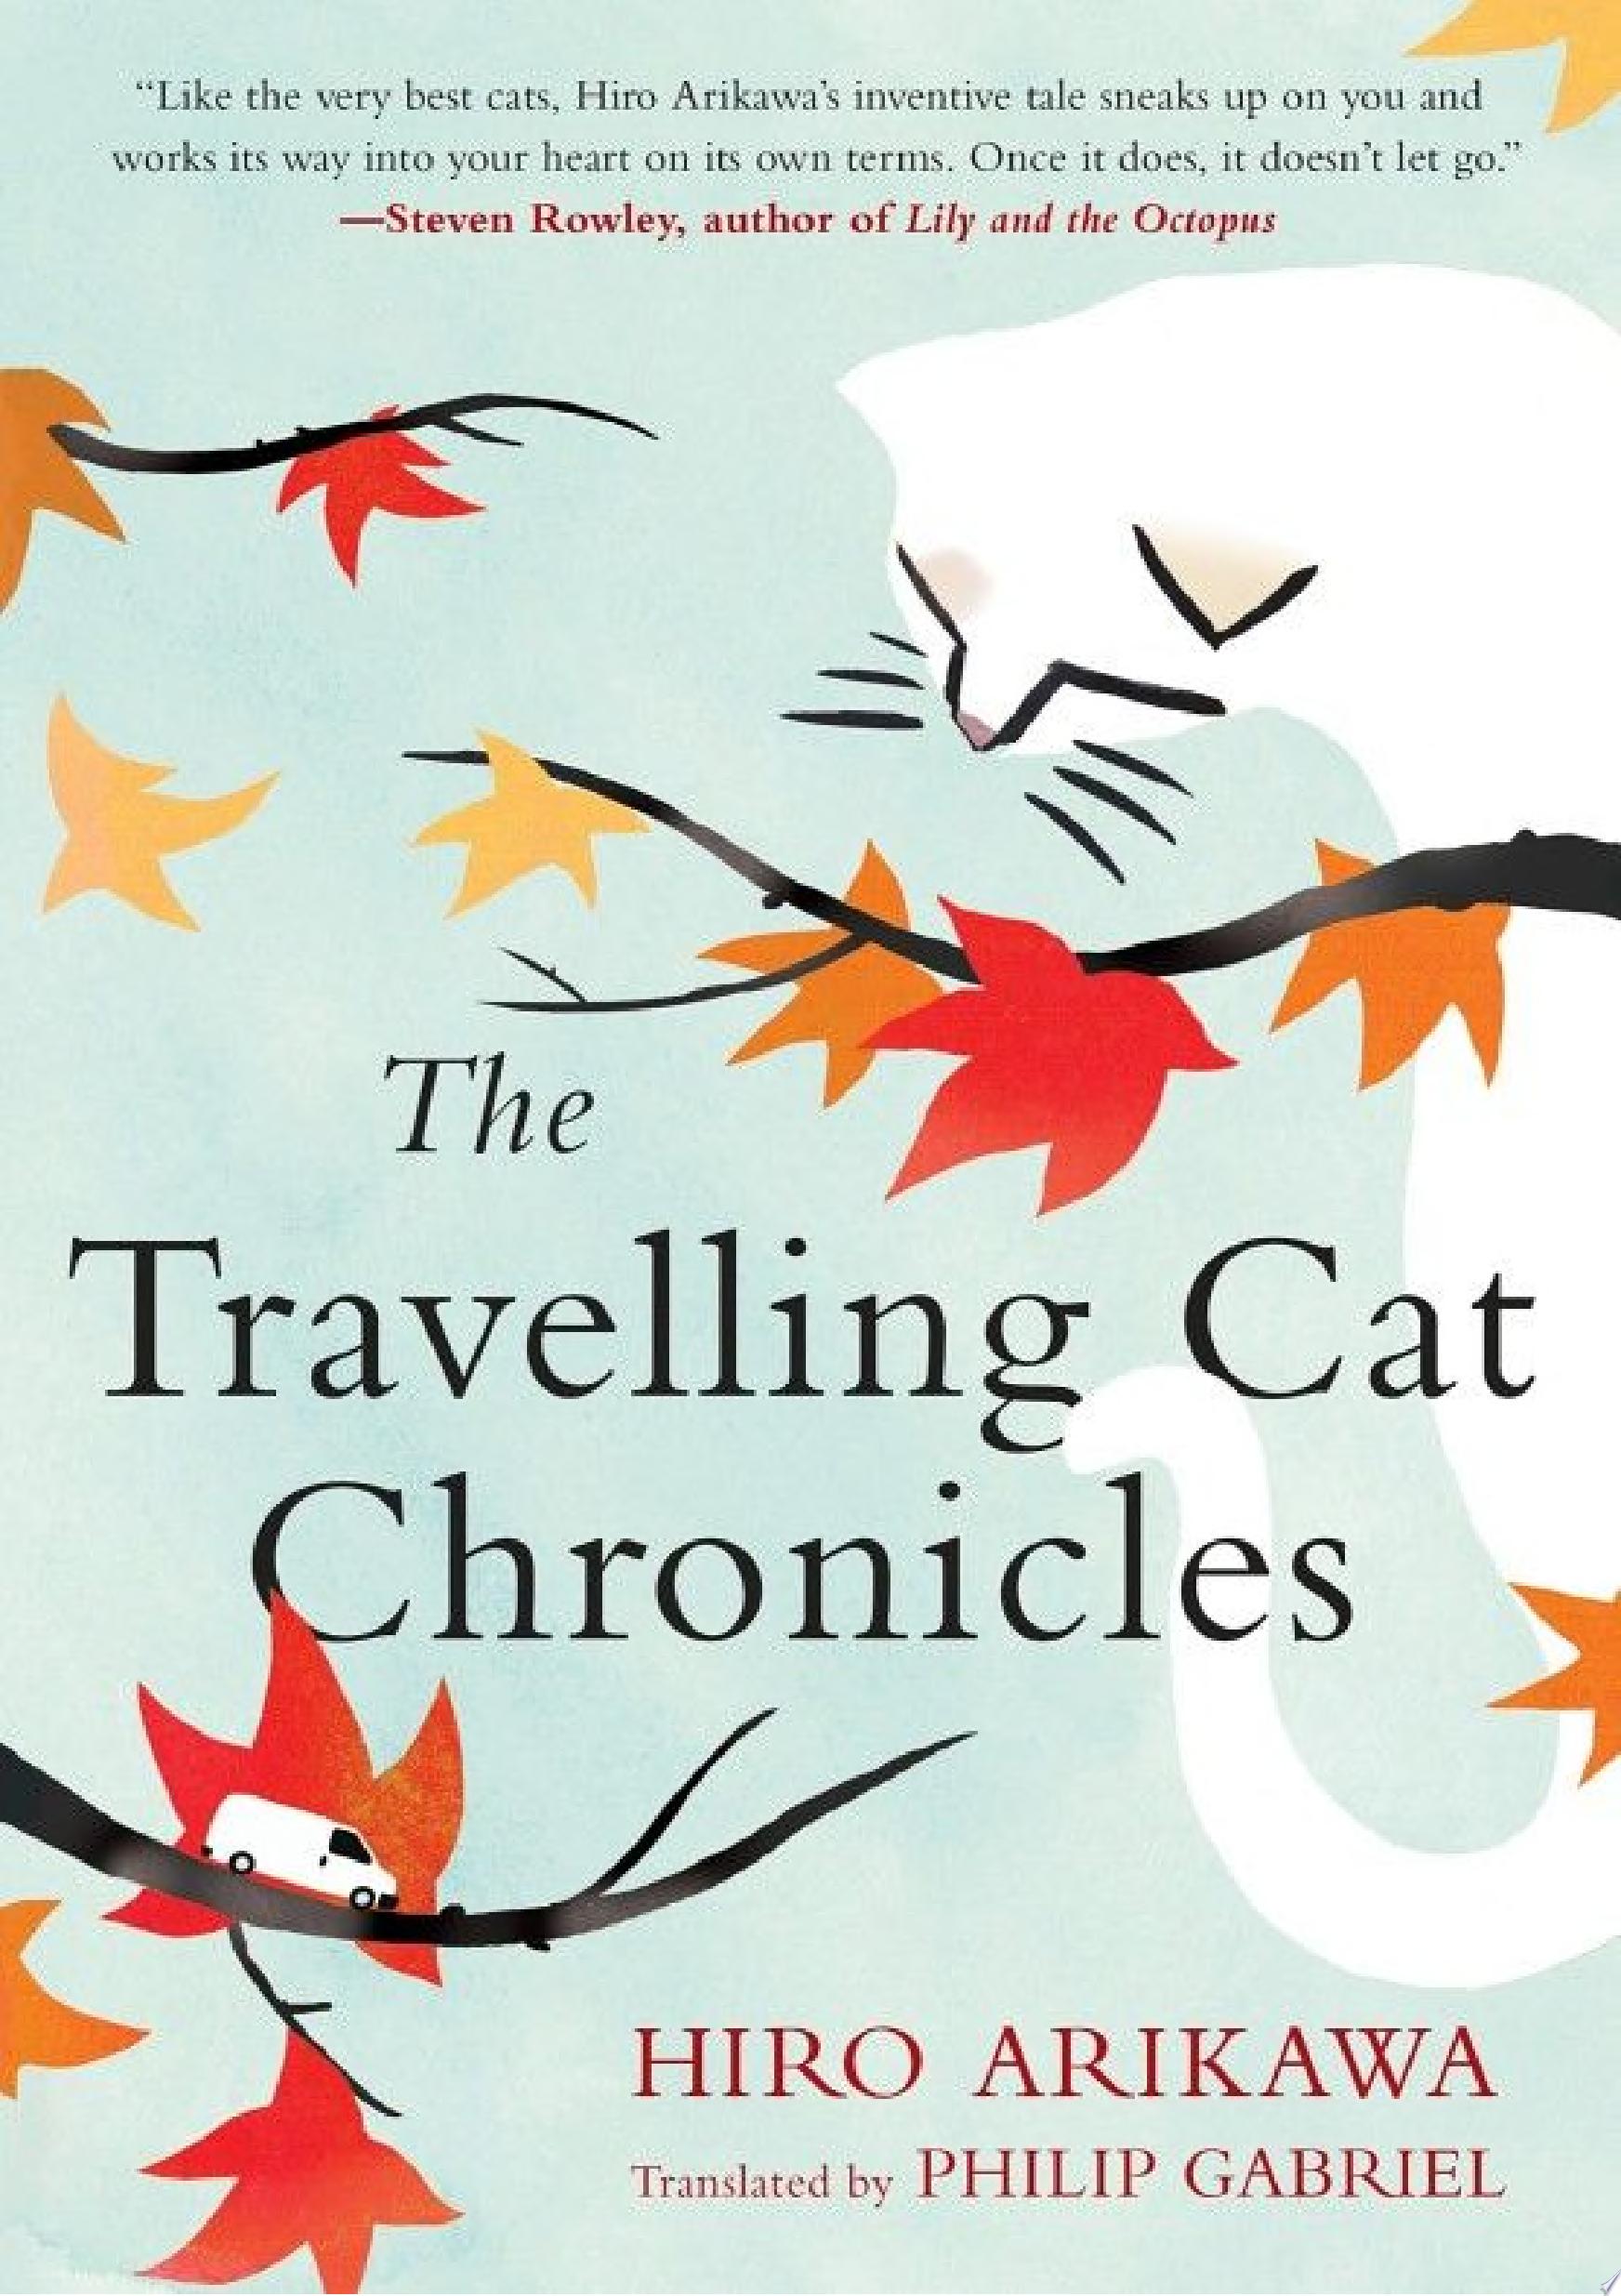 Image for "The Travelling Cat Chronicles"